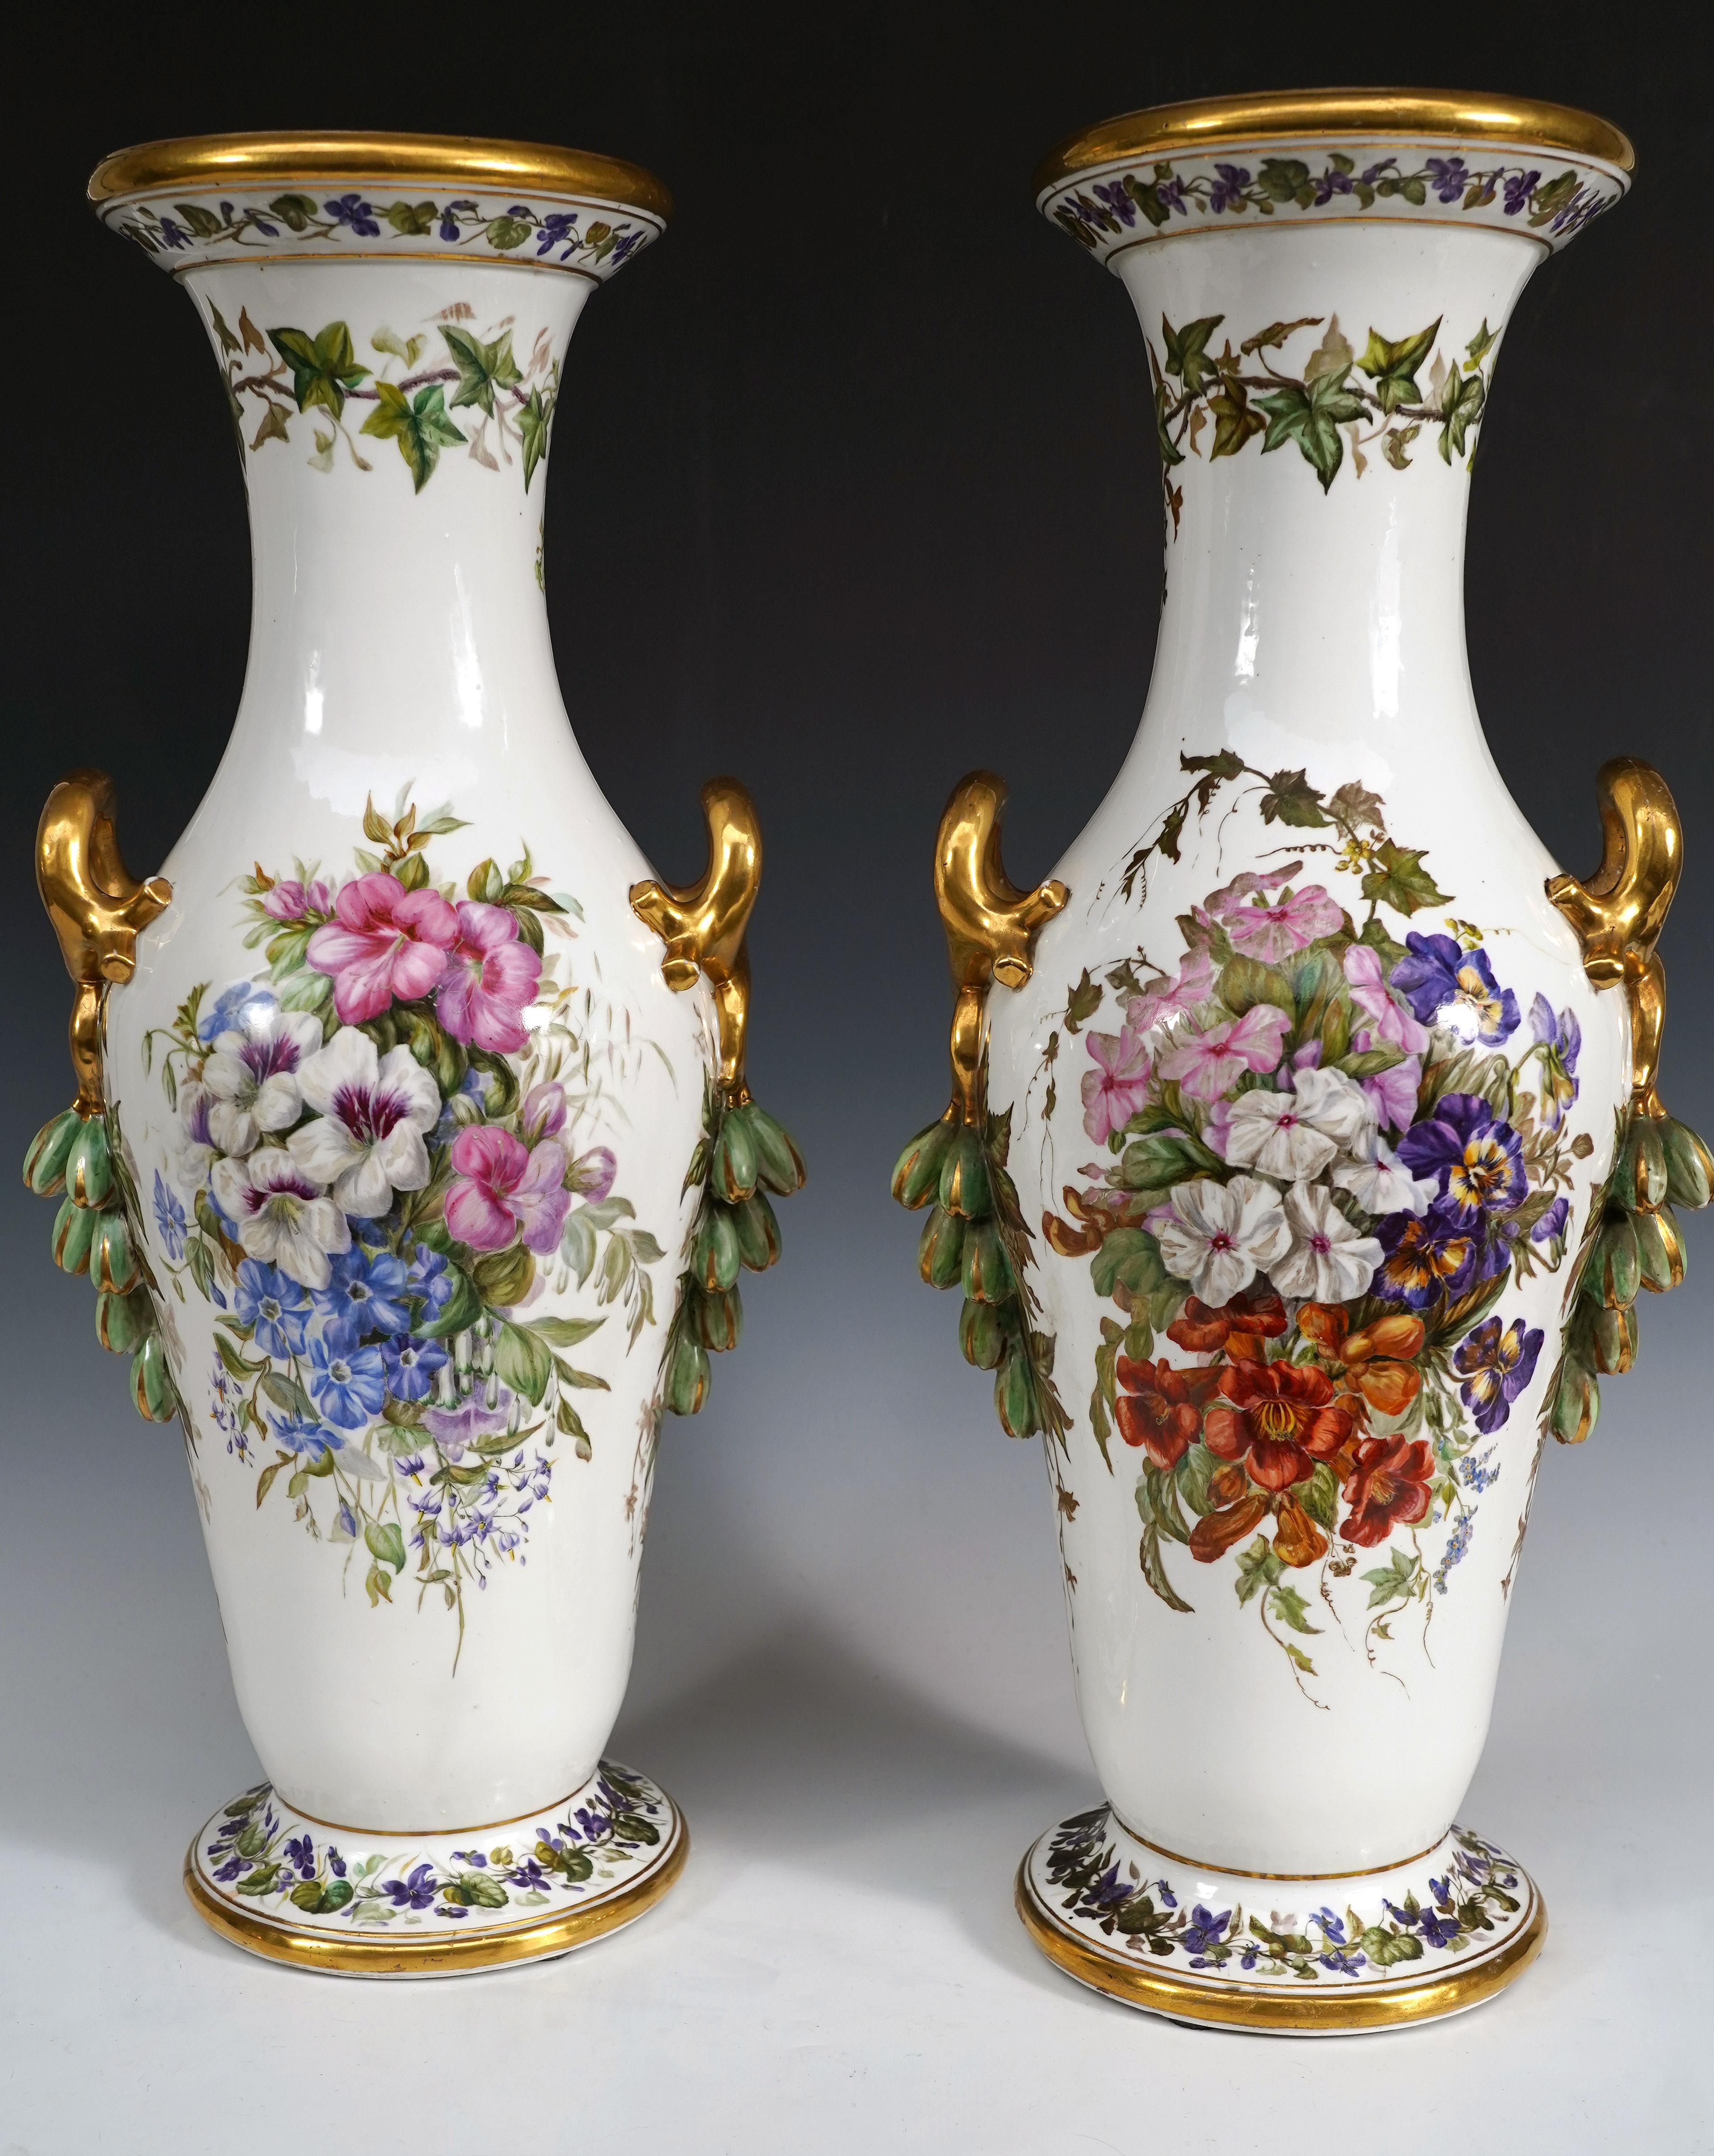 Designer’s mark AS on the base

Beautiful pair of baluster-shaped vases in white porcelain, richly decorated on all four sides with beautiful polychrome floral compositions framed by gilded porcelain handles from which bunches of flowers fall.
The